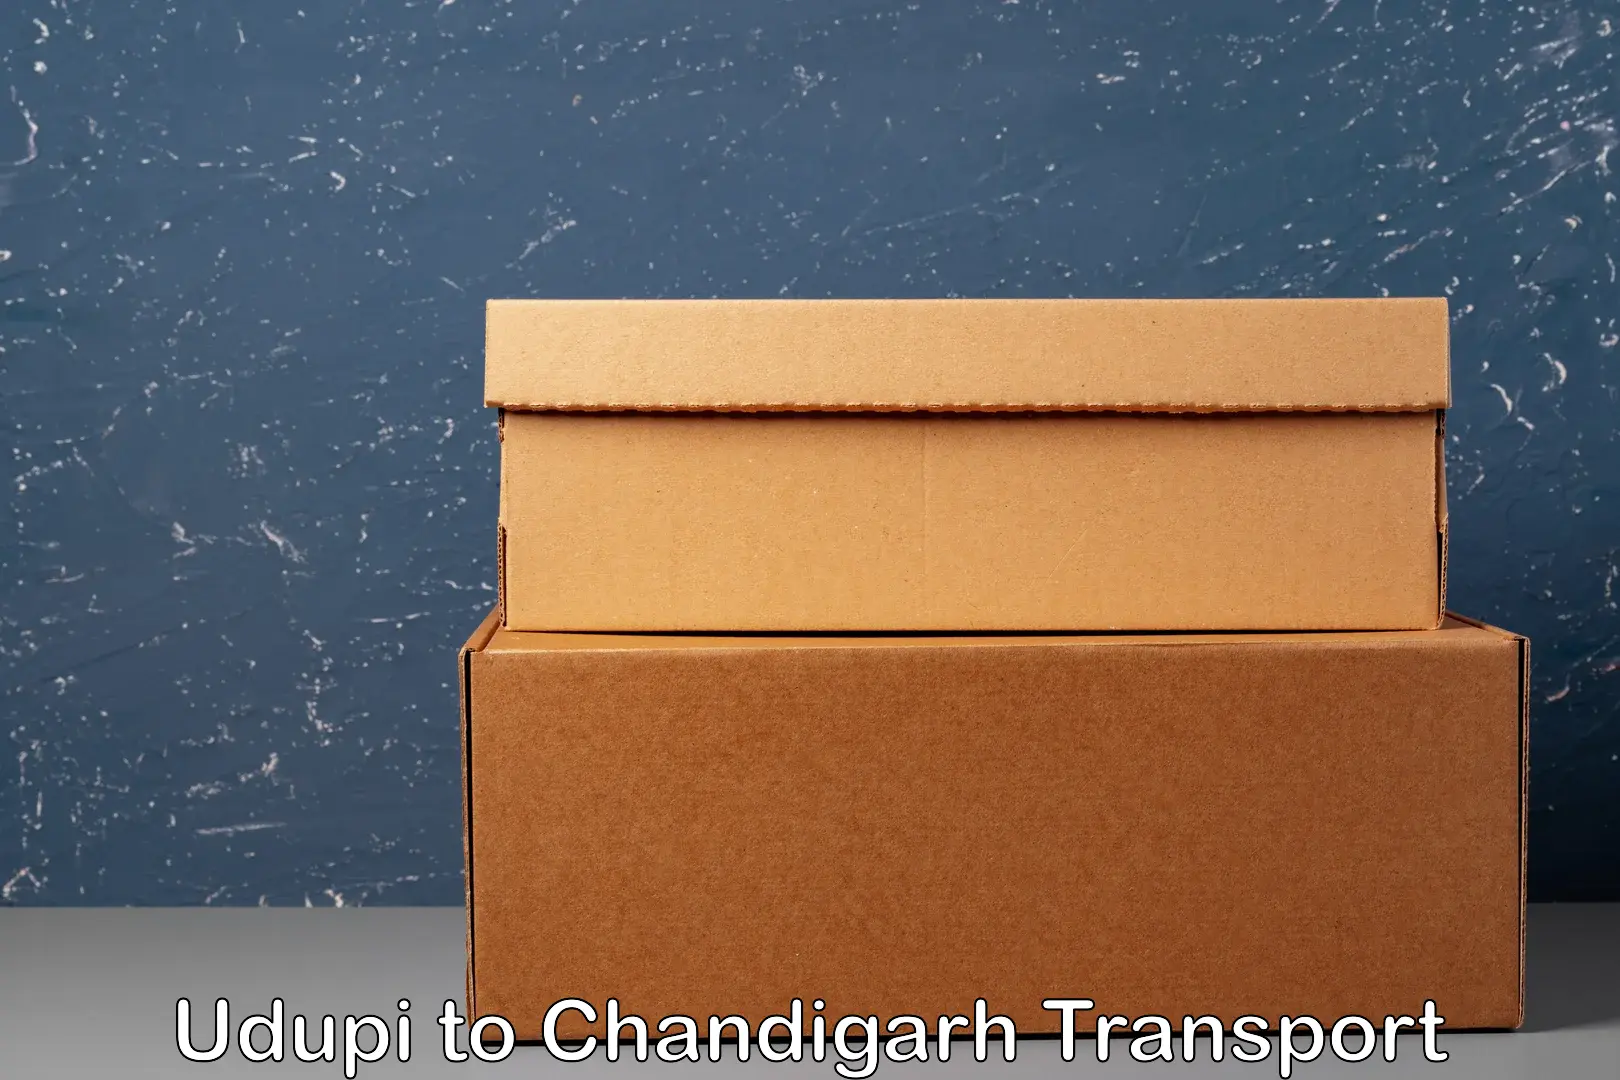 Delivery service Udupi to Chandigarh